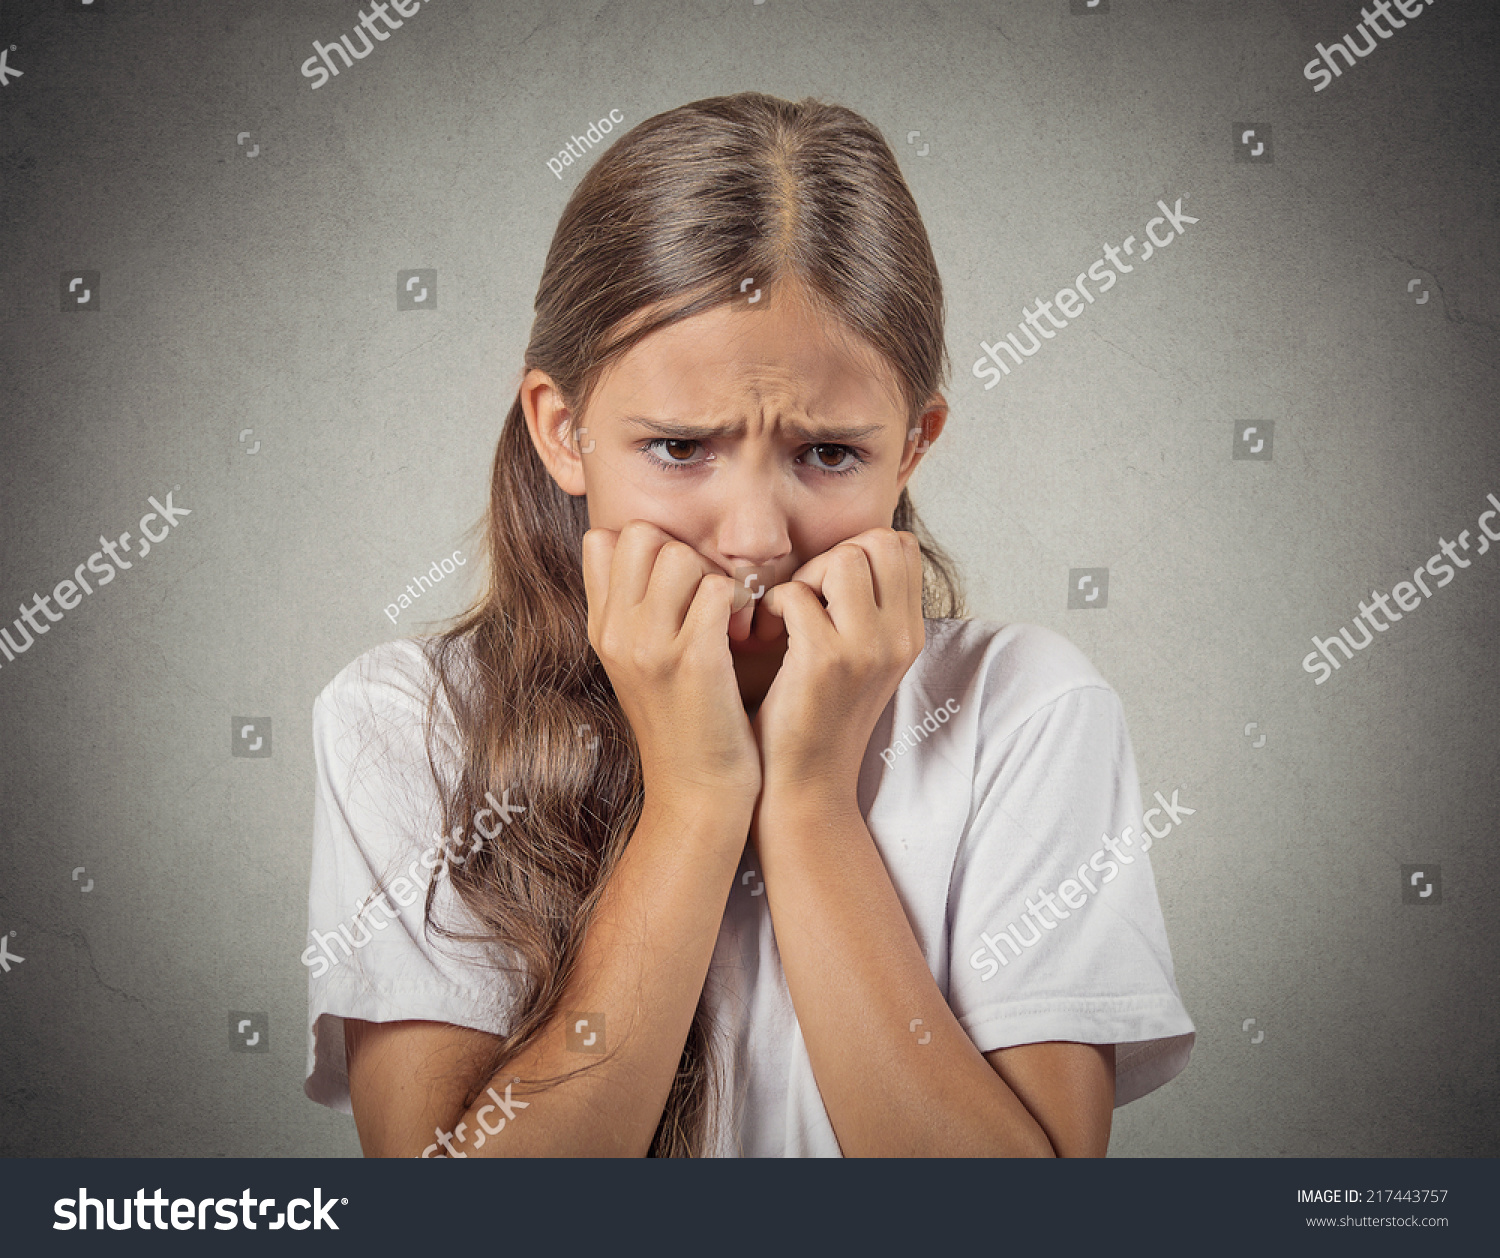 Scared Shy Closeup Portrait Nervous Anxious Stressed Teenager Girl Biting Fingernails Looking